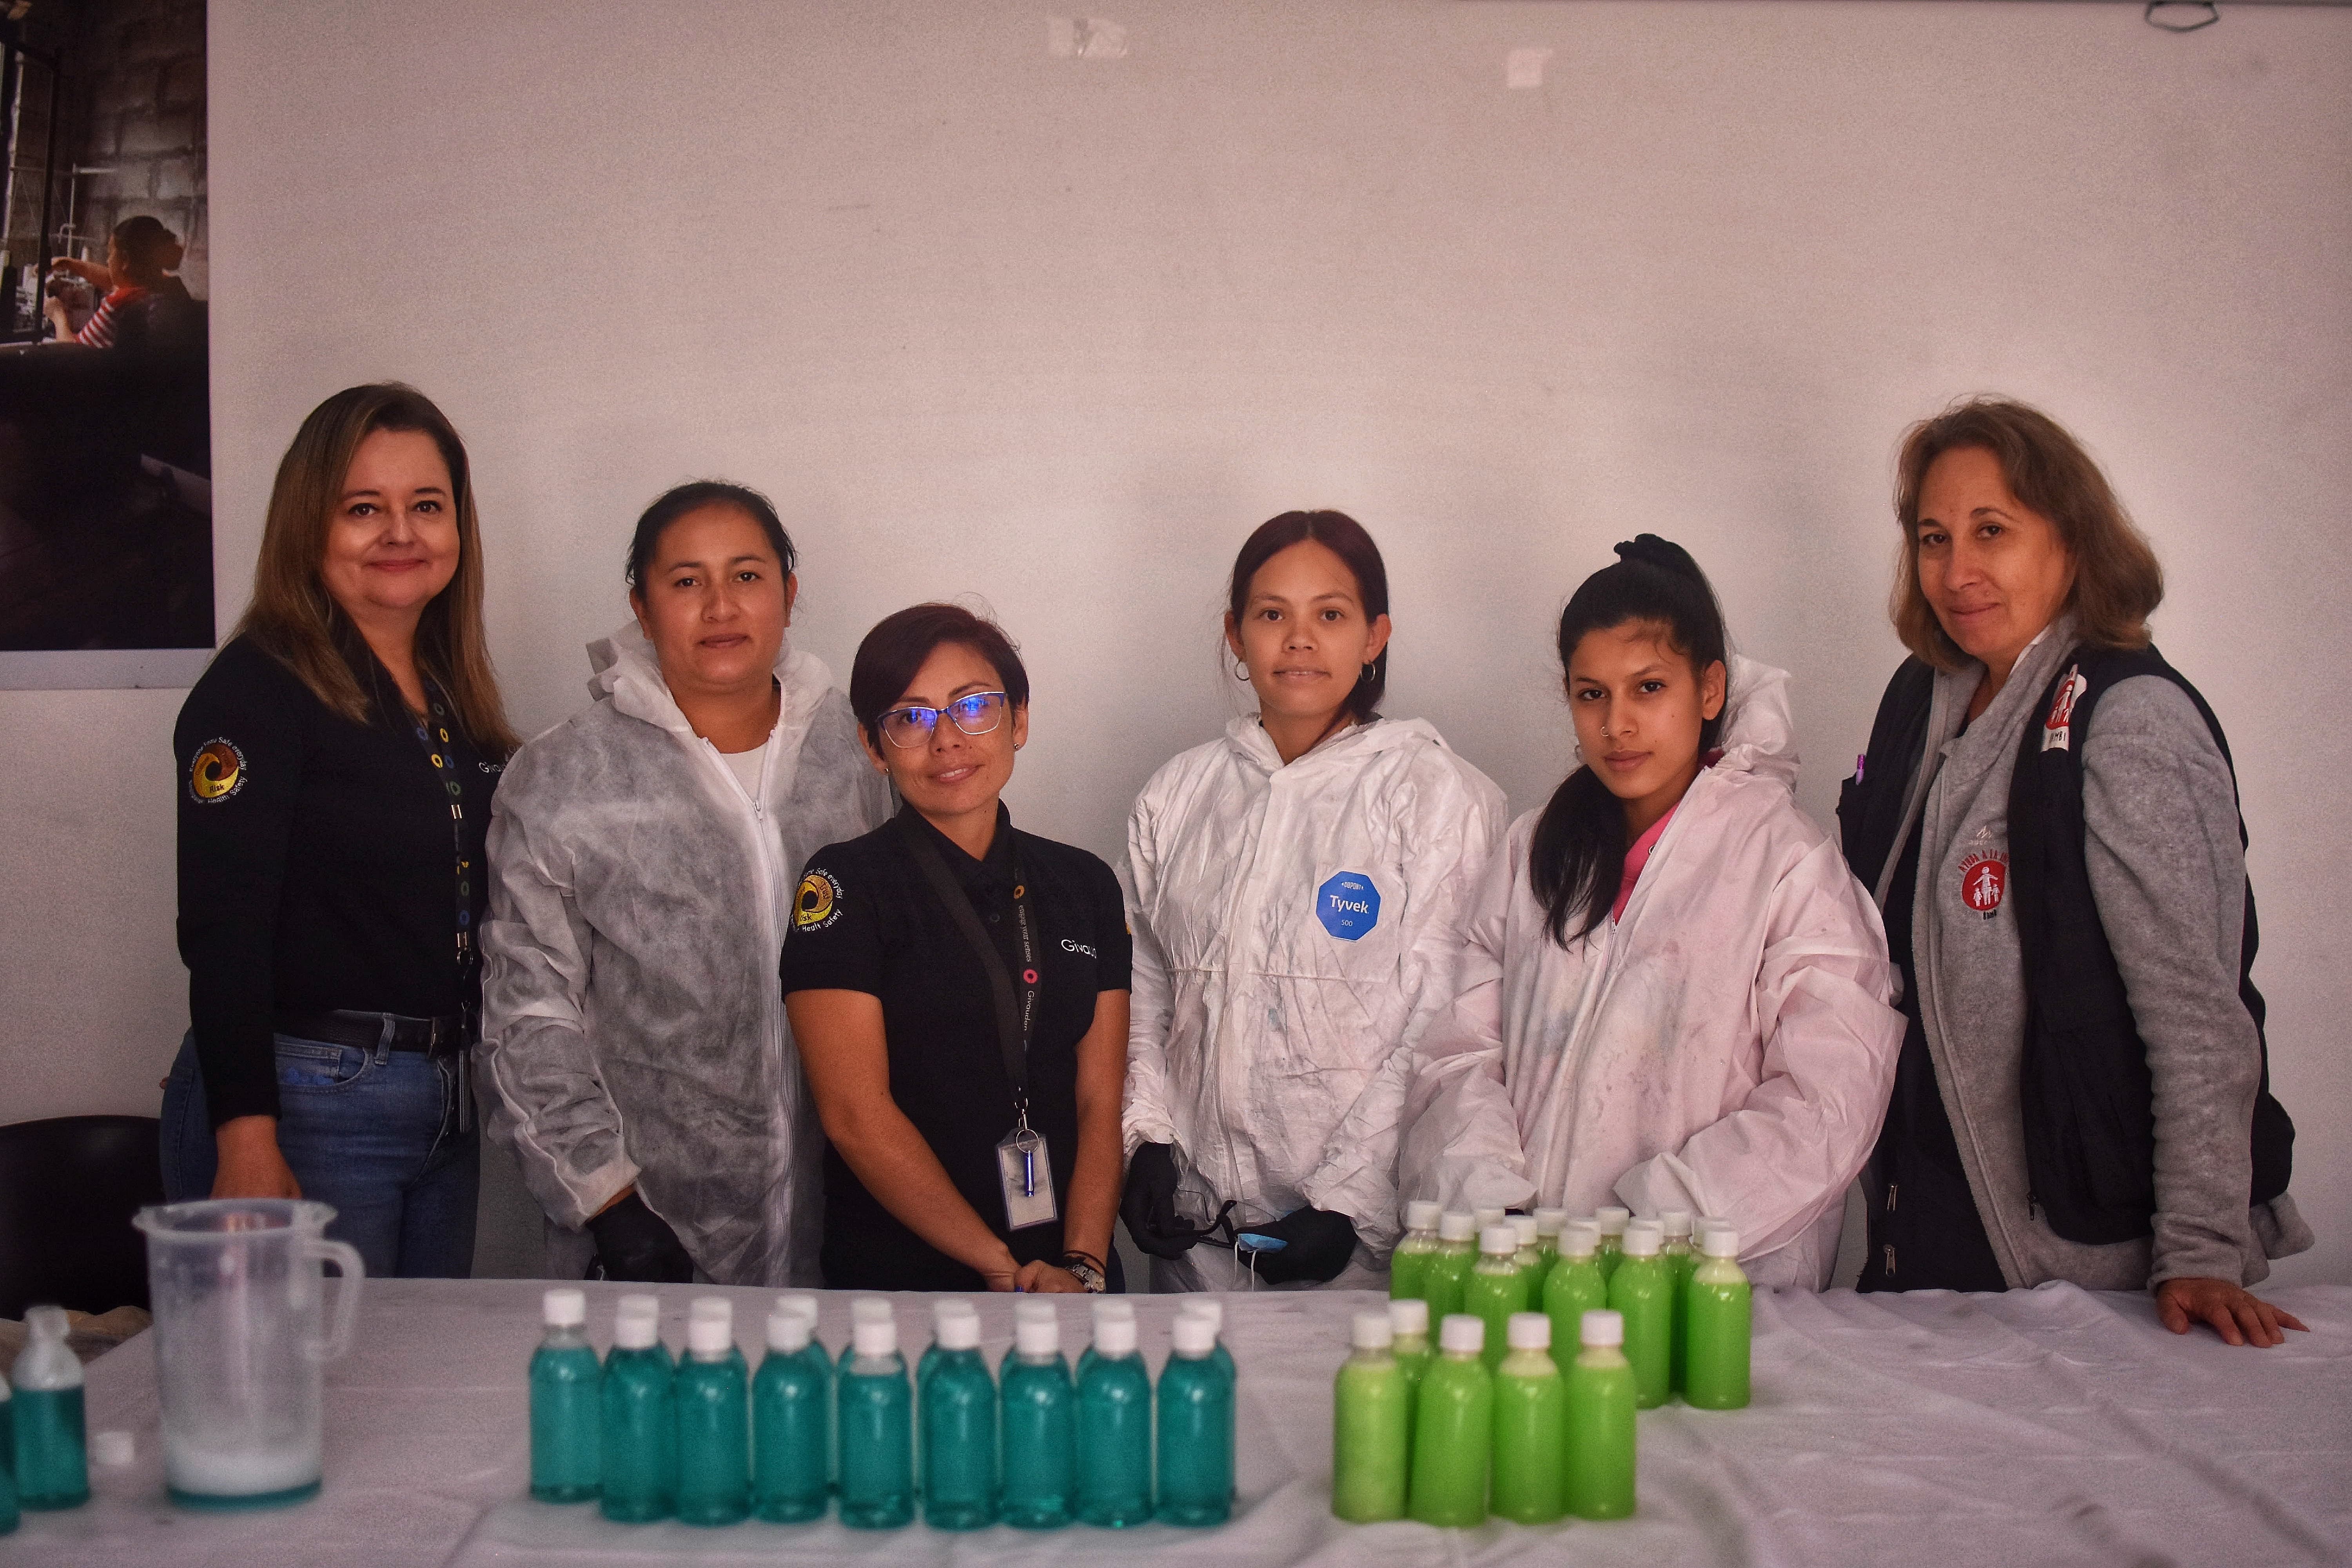 volunteers together with participants posing with their cleaning products